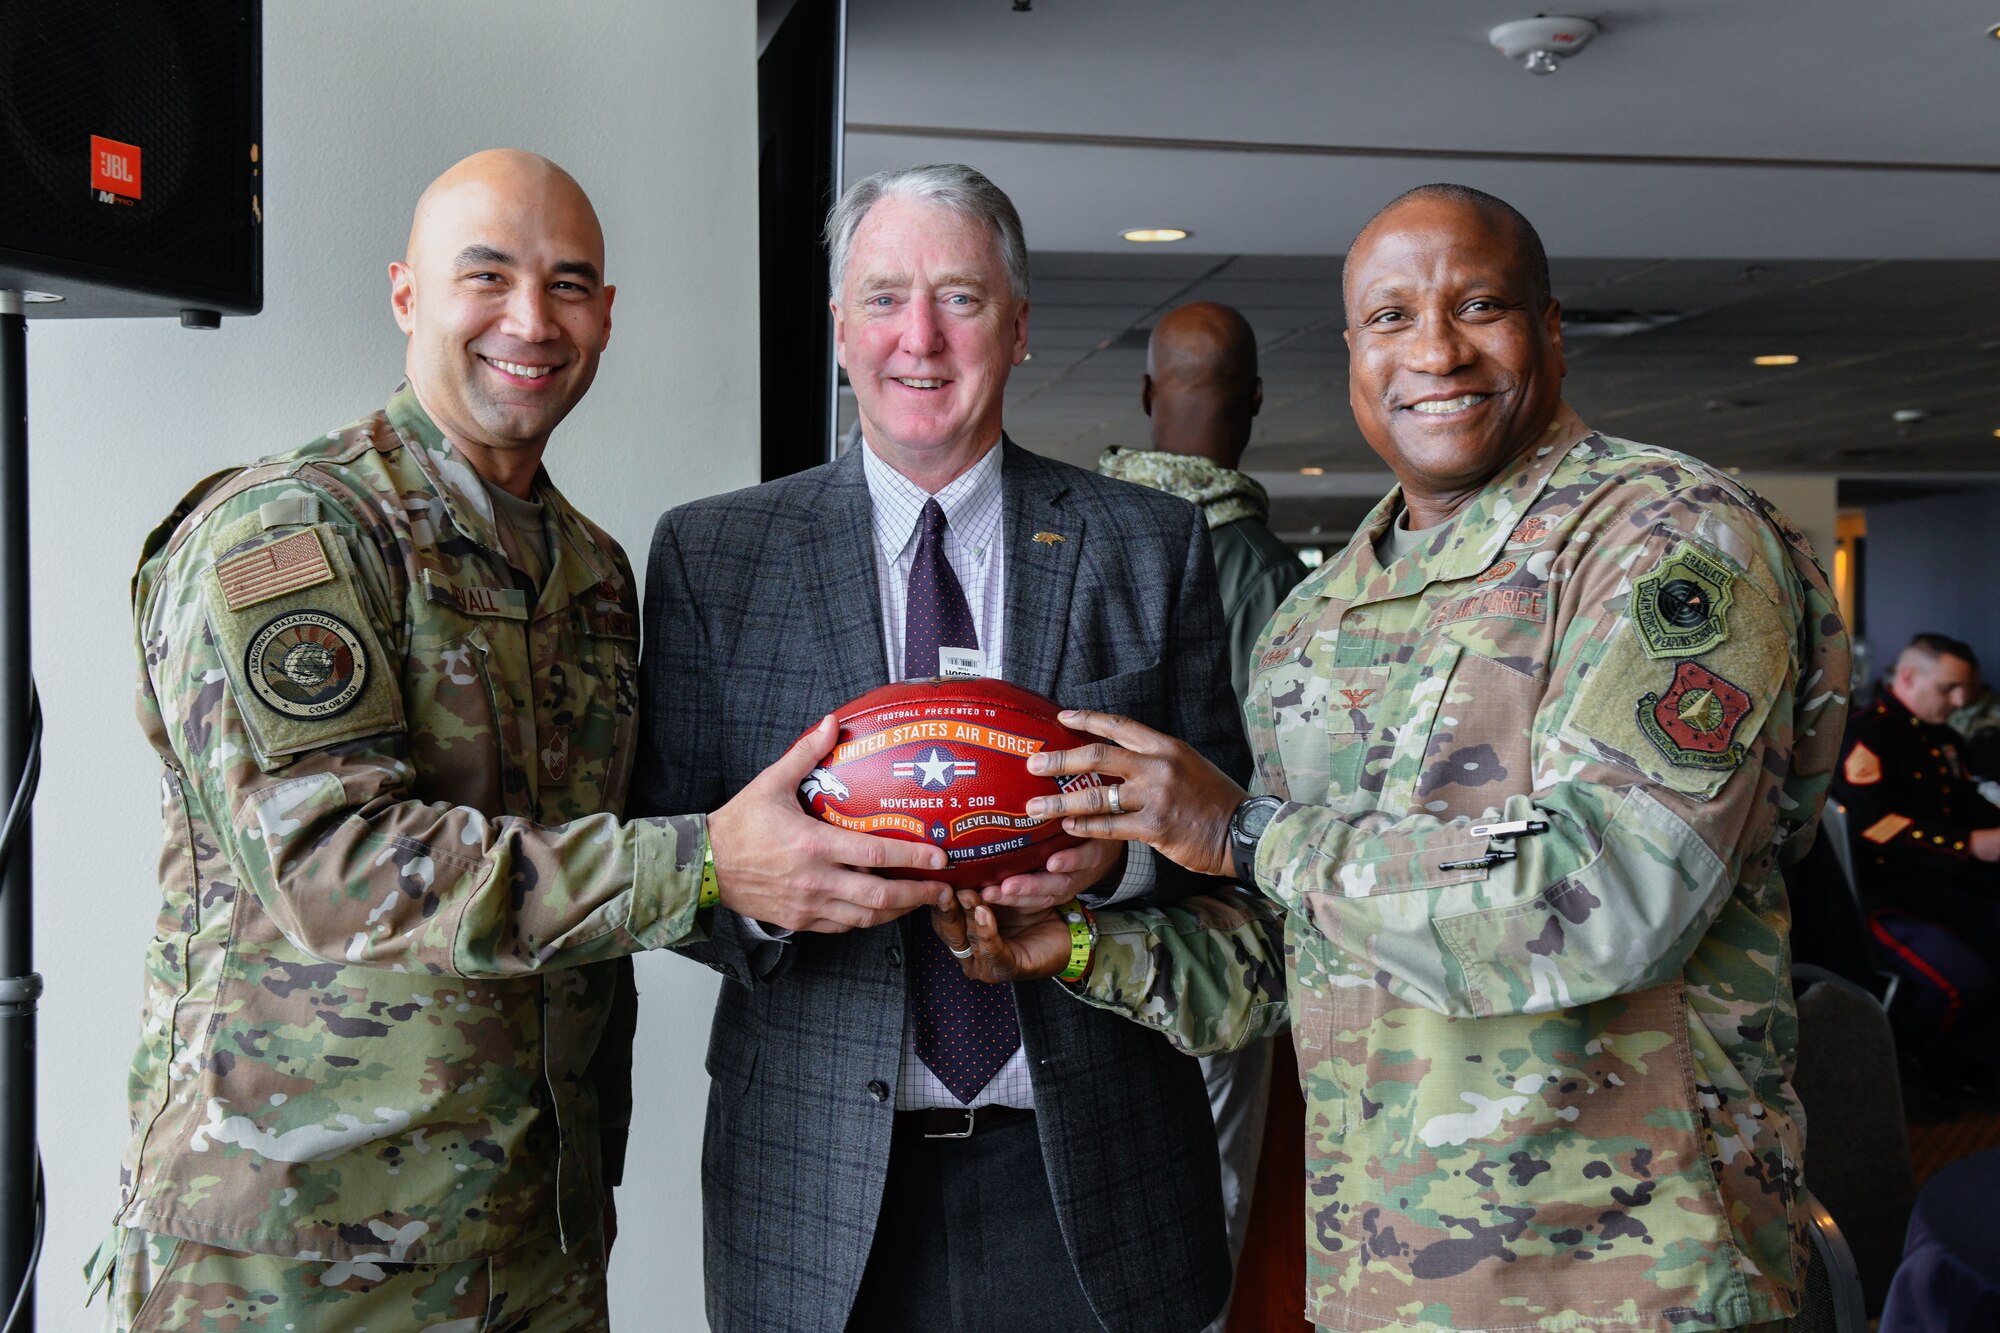 U.S. Air Force Chief Master Sgt. Robert Devall (left), the Aerospace Data Facility-Colorado senior enlisted leader, and Col. Devin Pepper (right), the 460th Space Wing commander, pose for a photo with Joe Ellis, the Denver Broncos president and chief executive officer, Nov. 3, 2019, at Empower Field at Mile High in Denver.